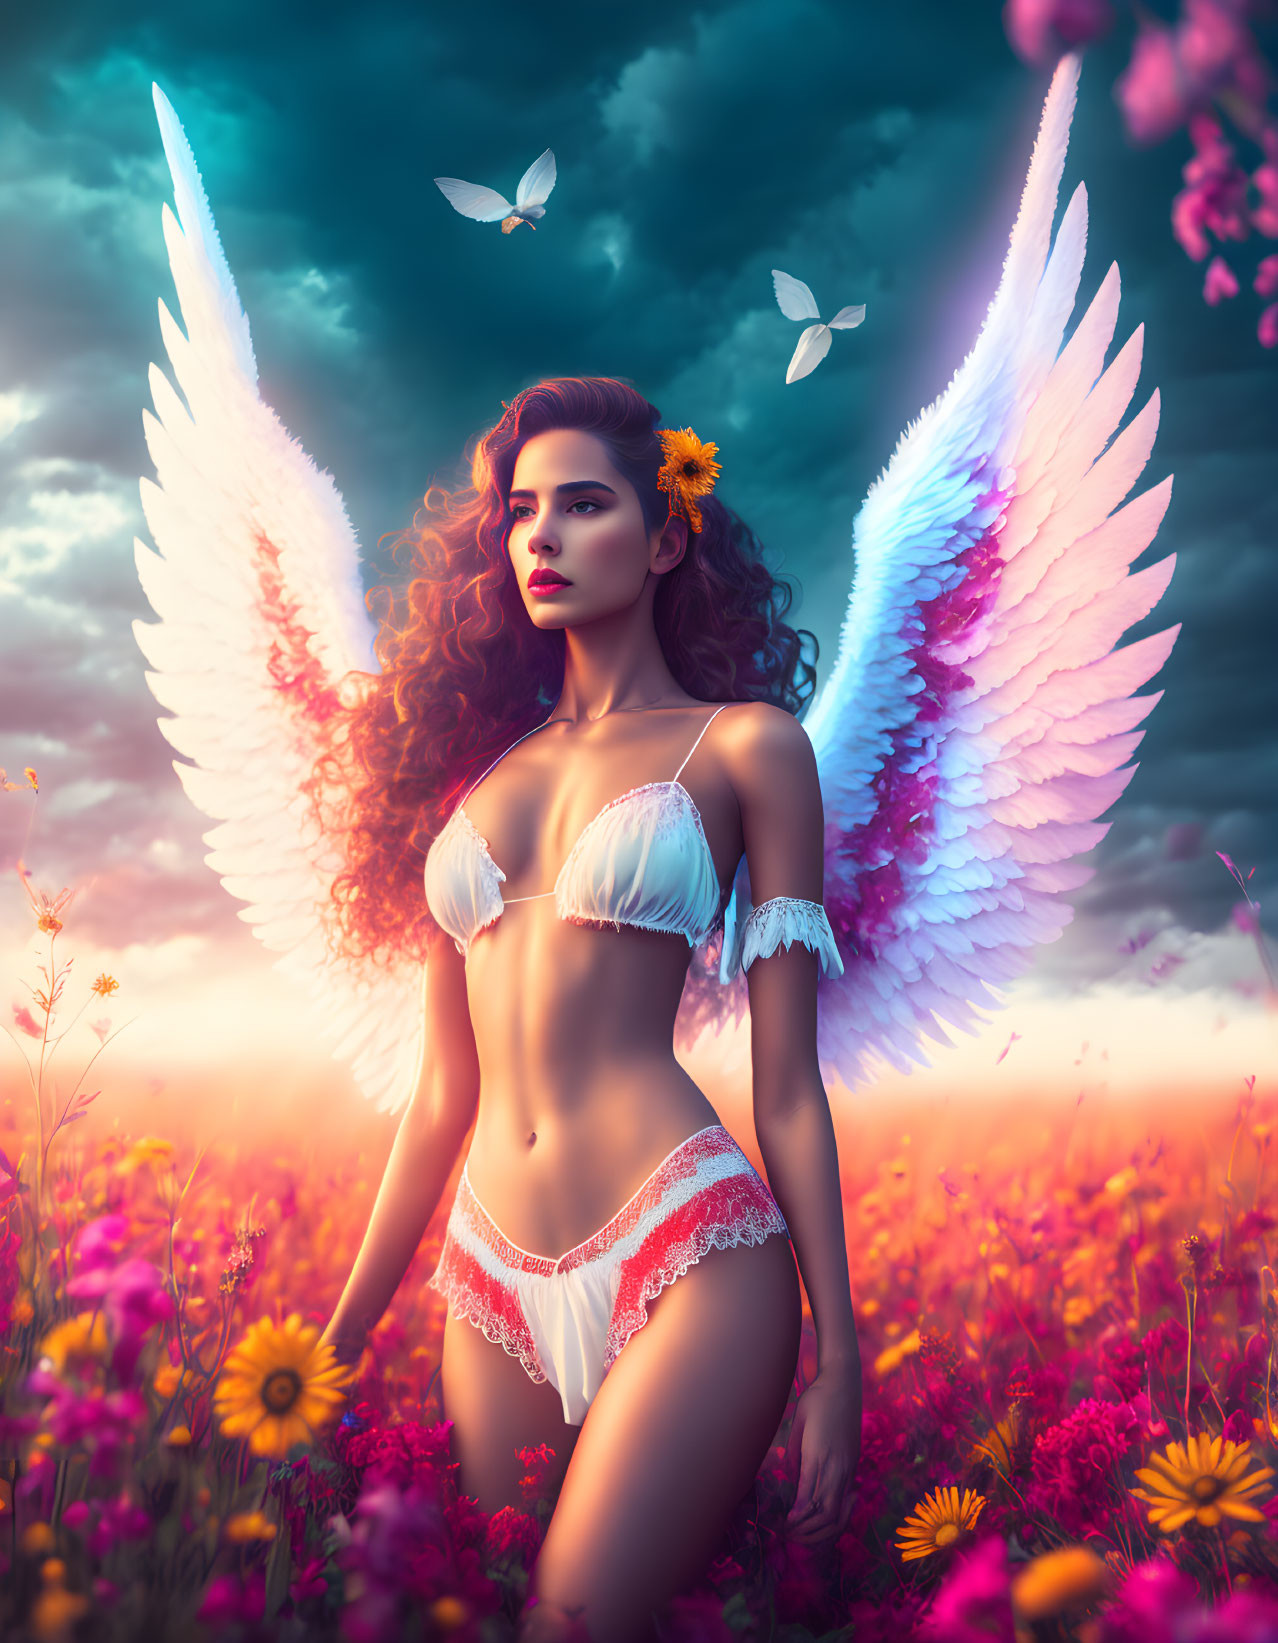 Woman with white wings in surreal wildflower scene under dramatic sky